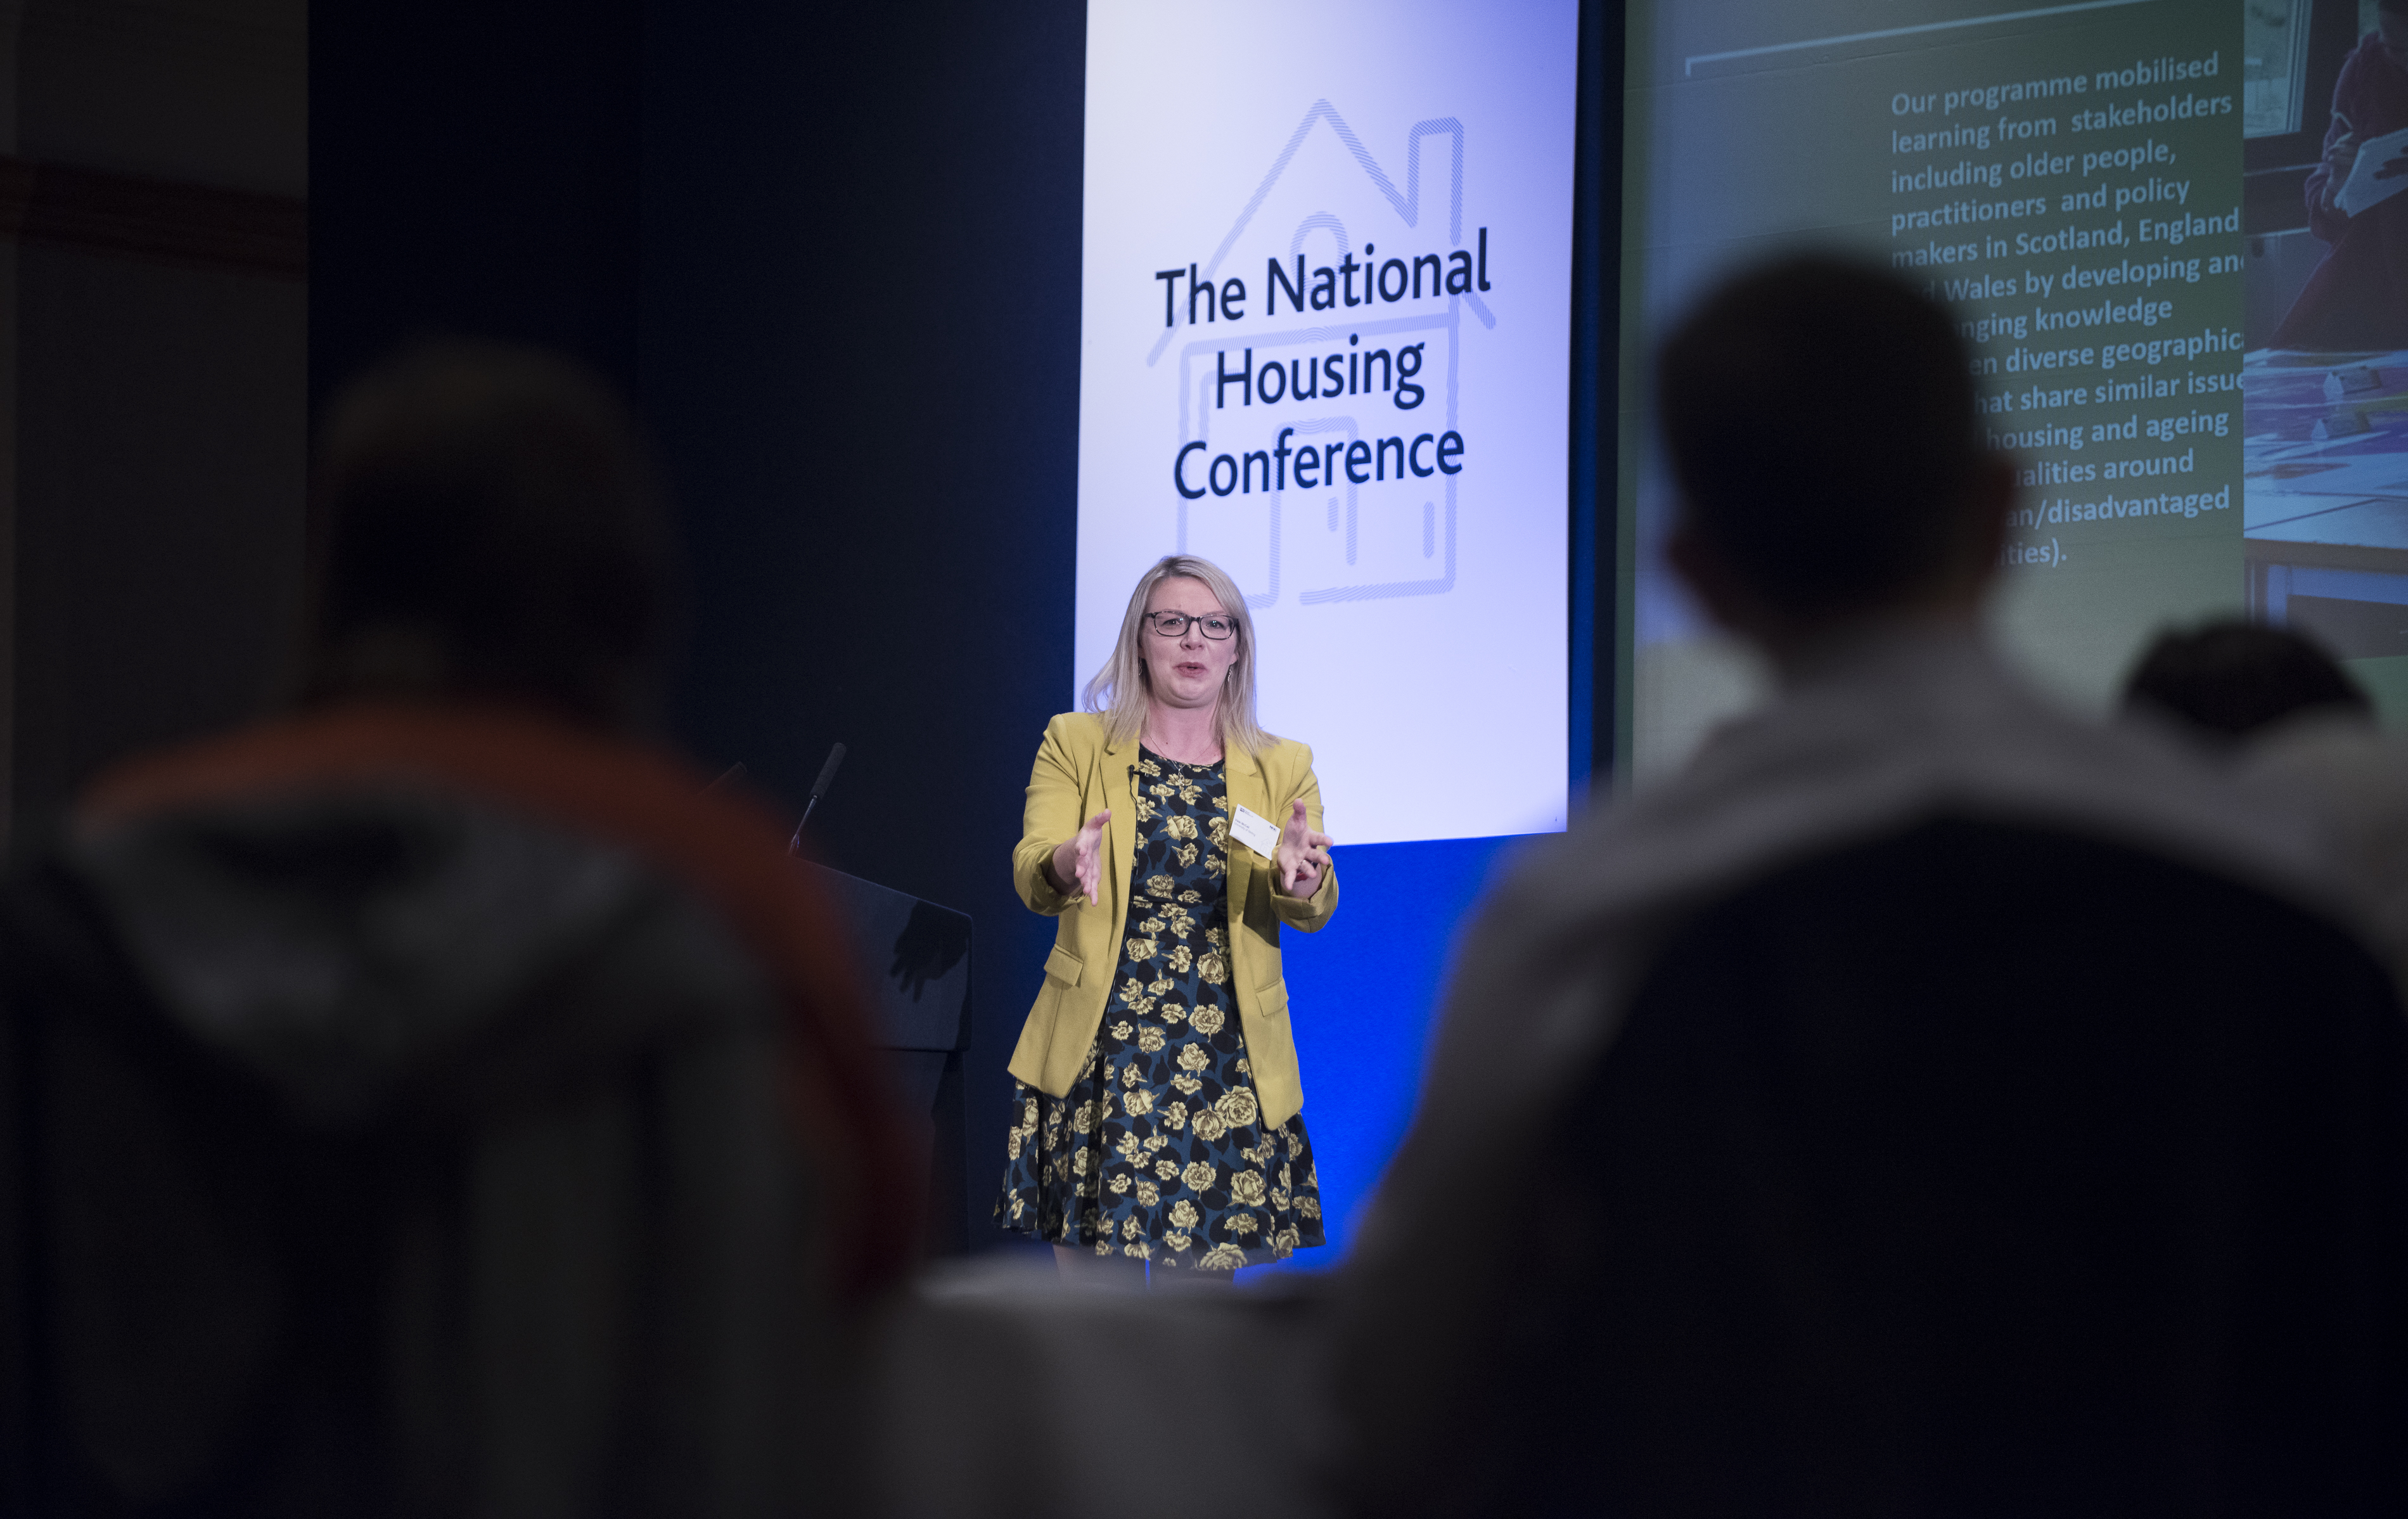 Social housing sector must 'think radically' to be ready for a new age, conference told